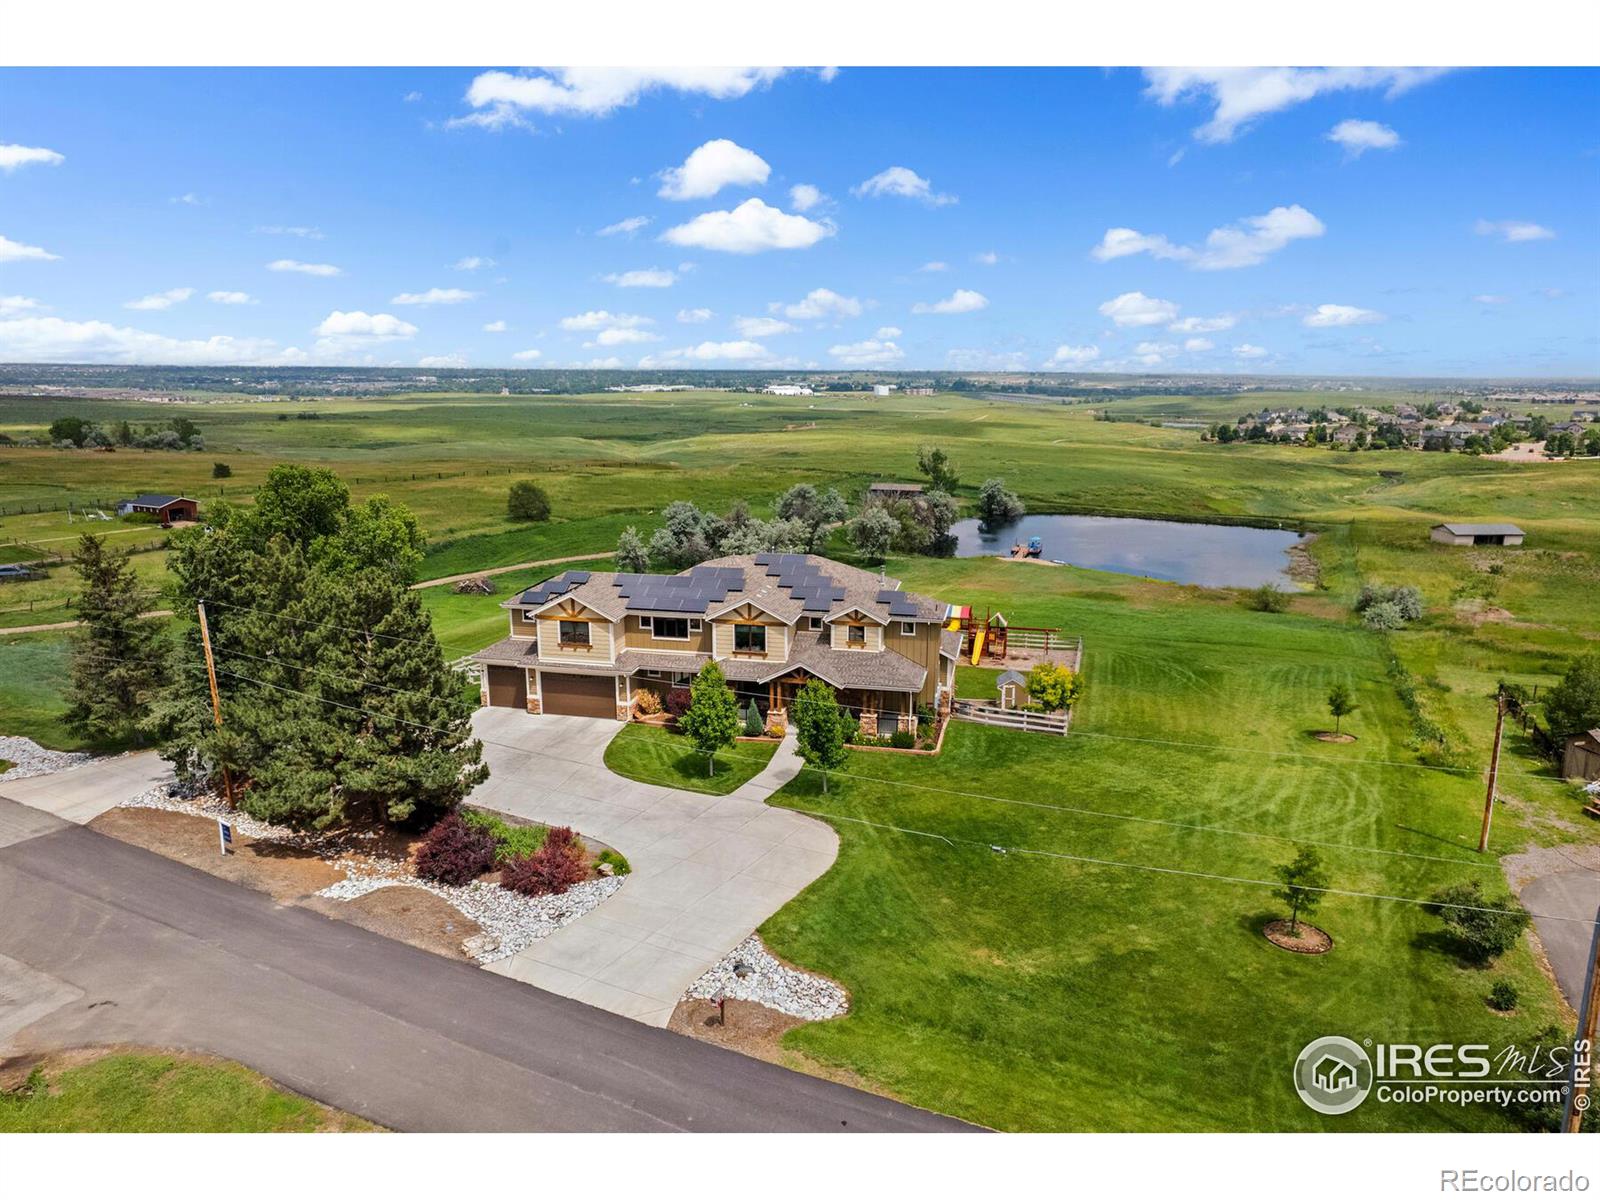 Report Image for 12681  Appaloosa Place,Broomfield, Colorado